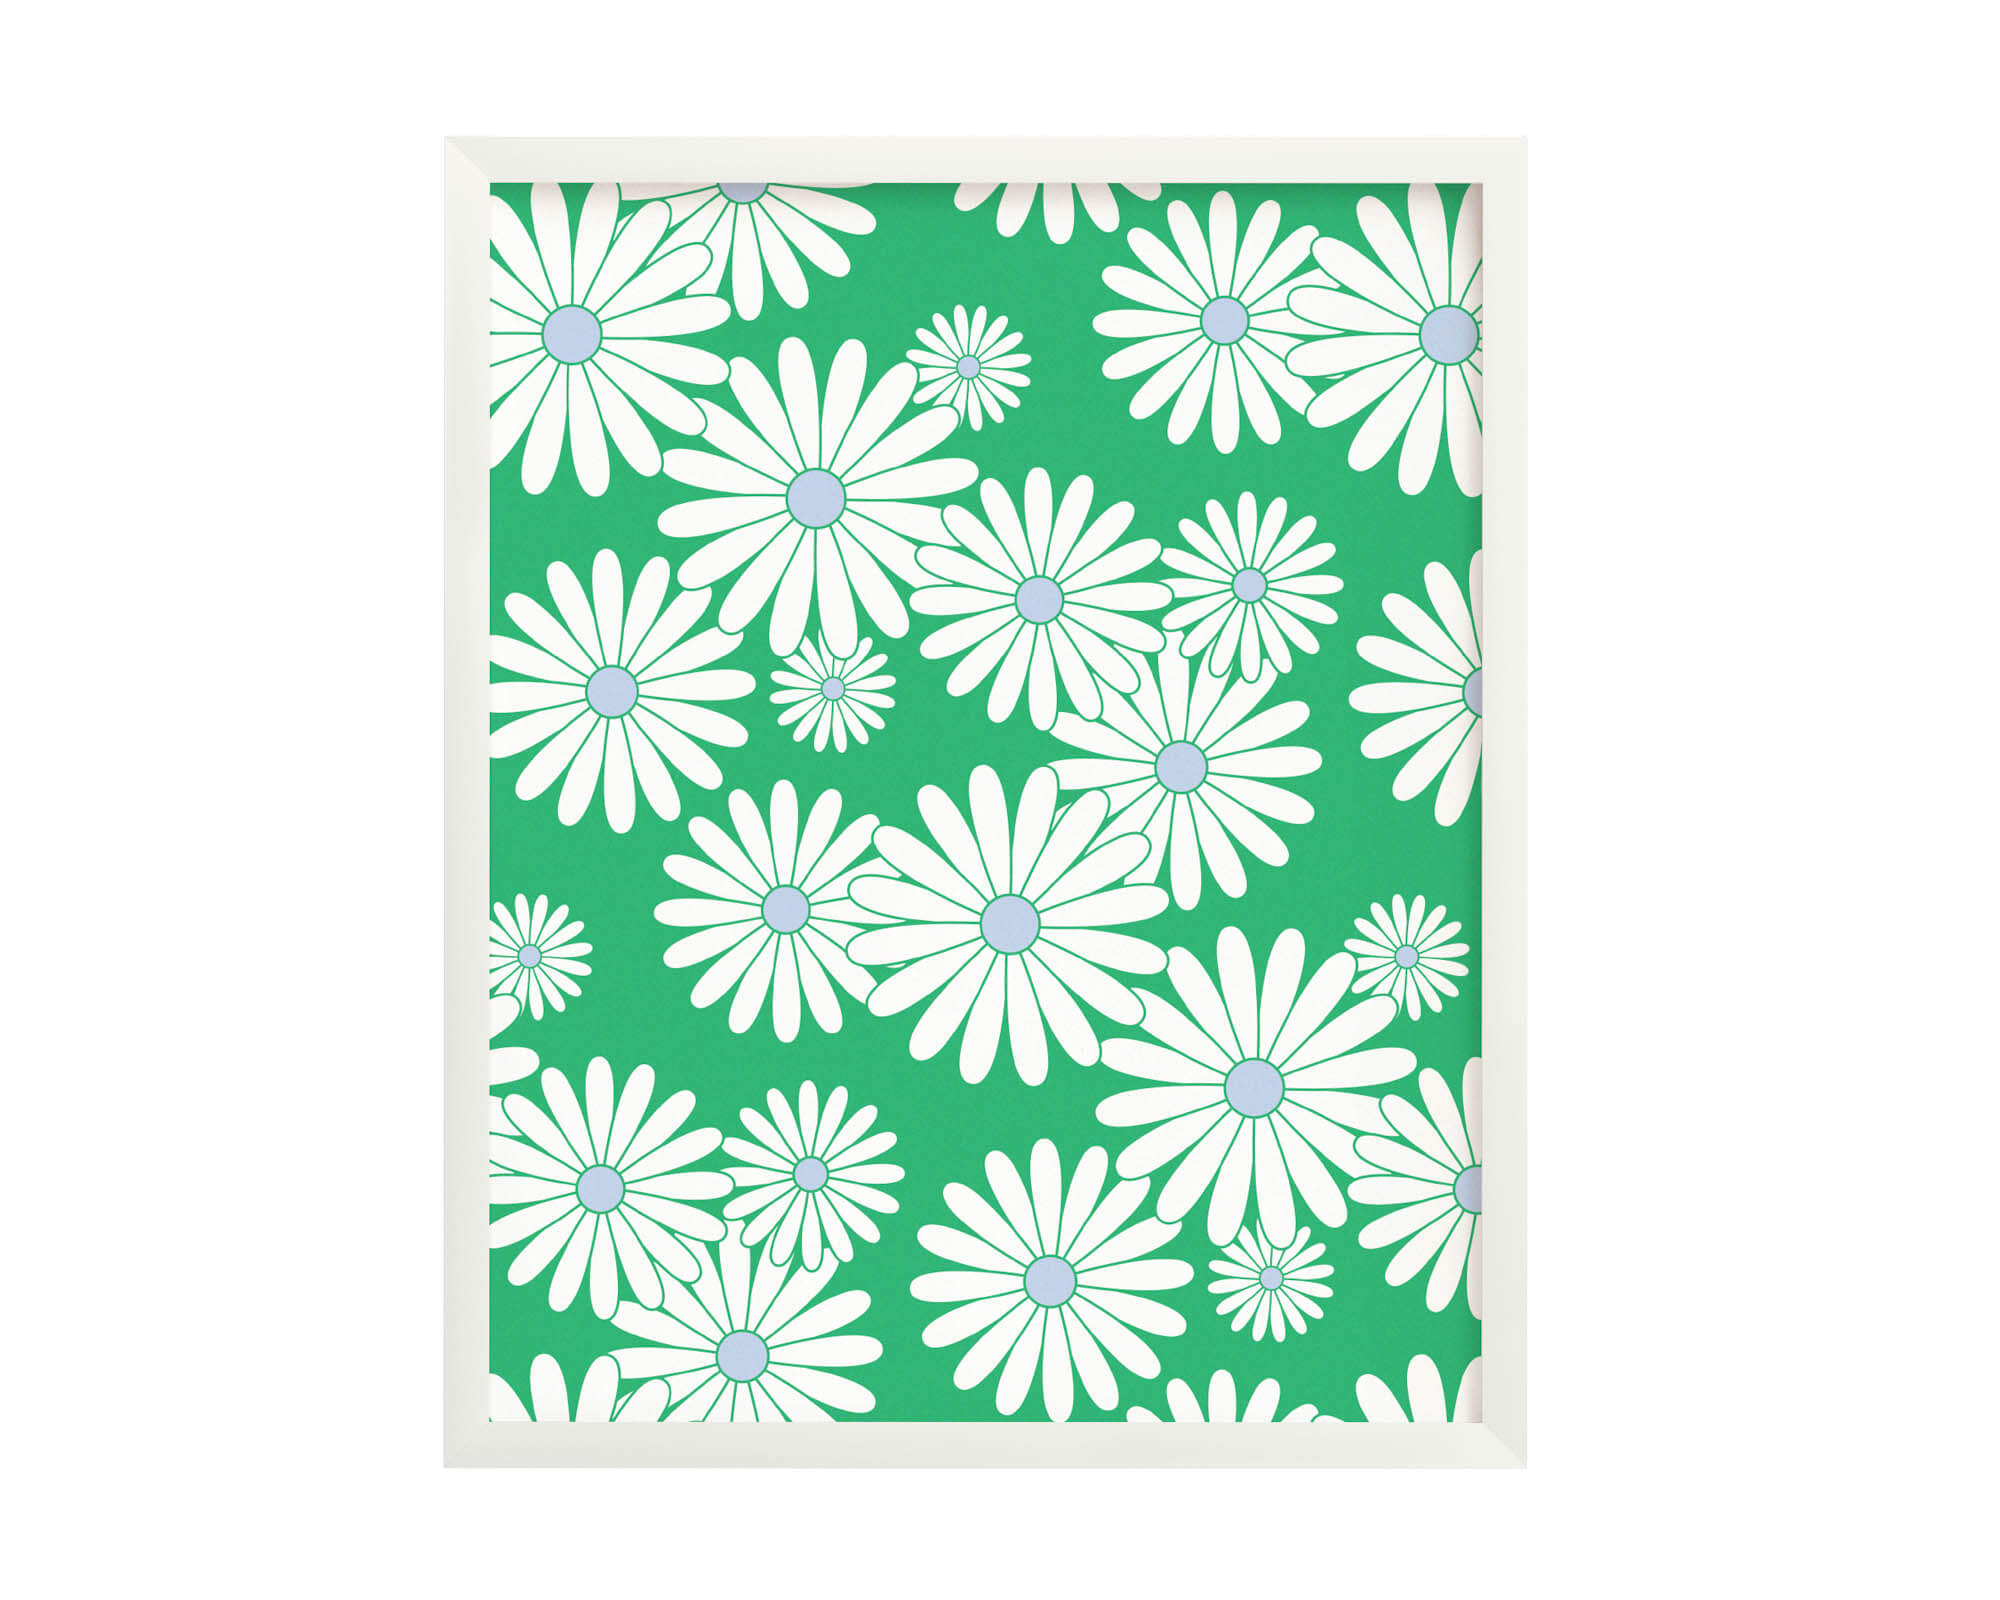 "Ditsy Daisy Love" scattered daisy pattern archival giclée art print in green and blue. Made in USA by My Darlin' @mydarlin_bk